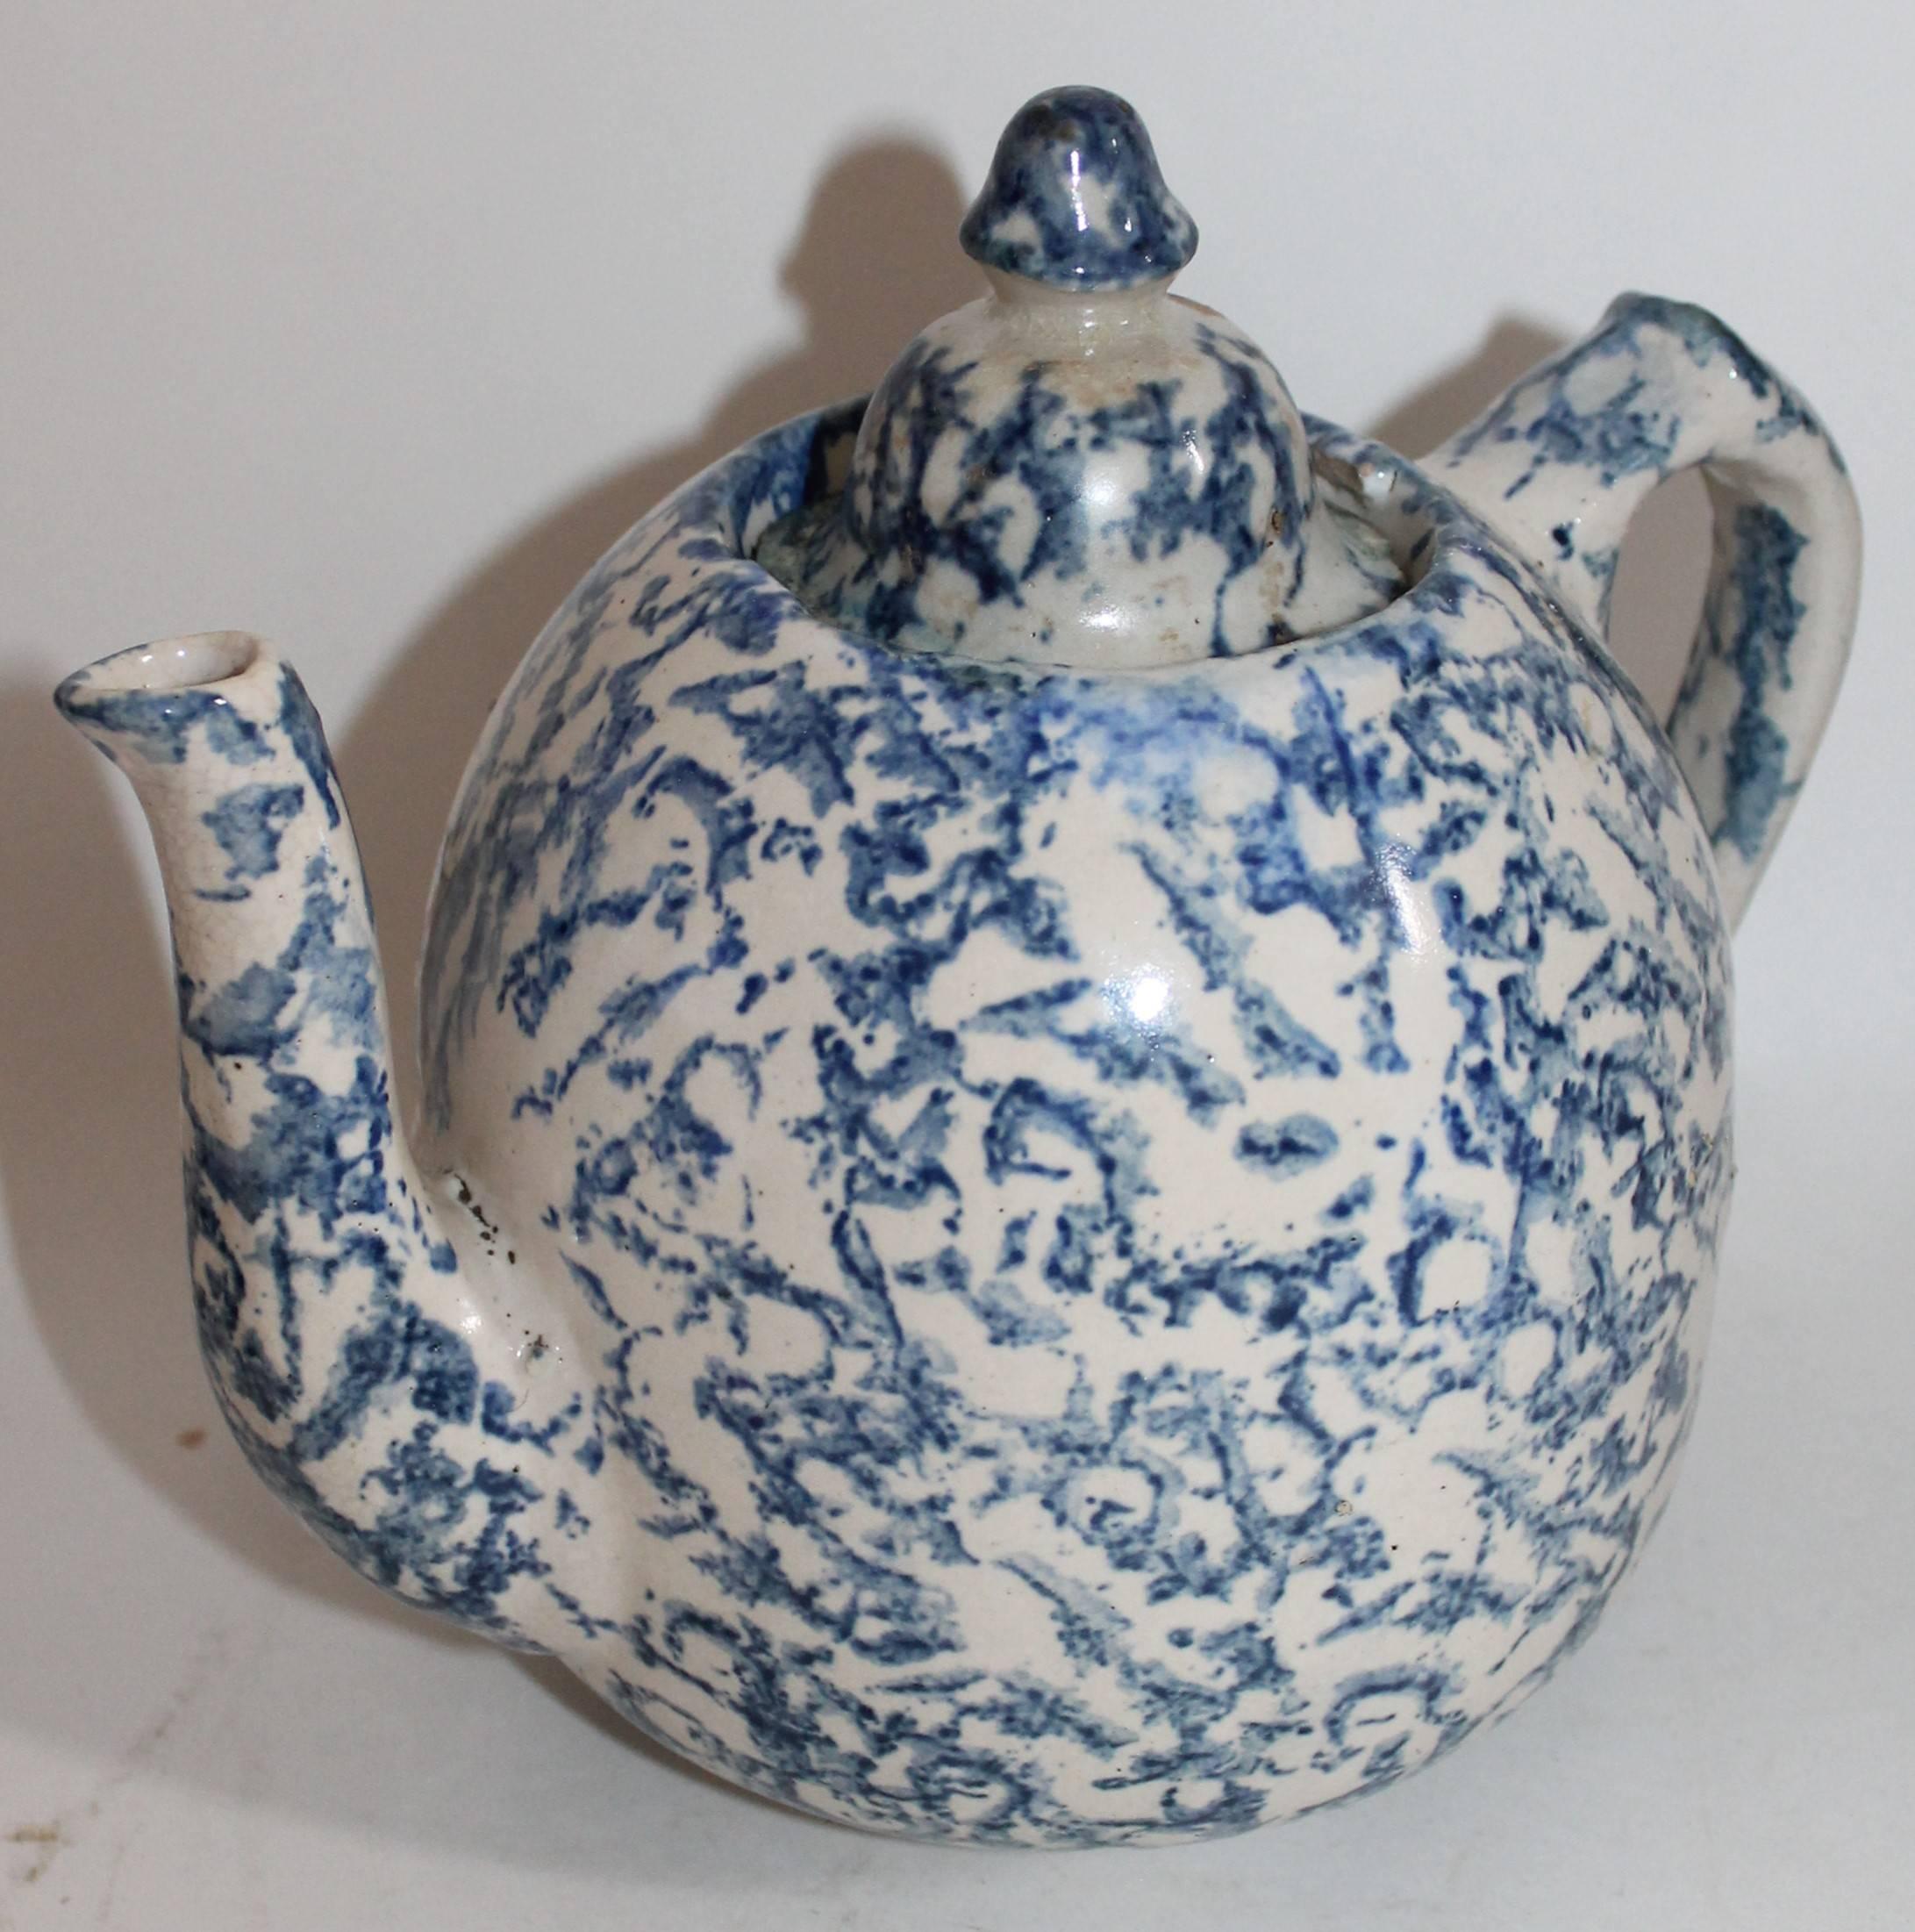 This fine 19th century sponge ware teapot is in very good condition with wear on base consistent with age and use. It seems like there were very minor repairs to the lid of the teapot. Not bad at all.